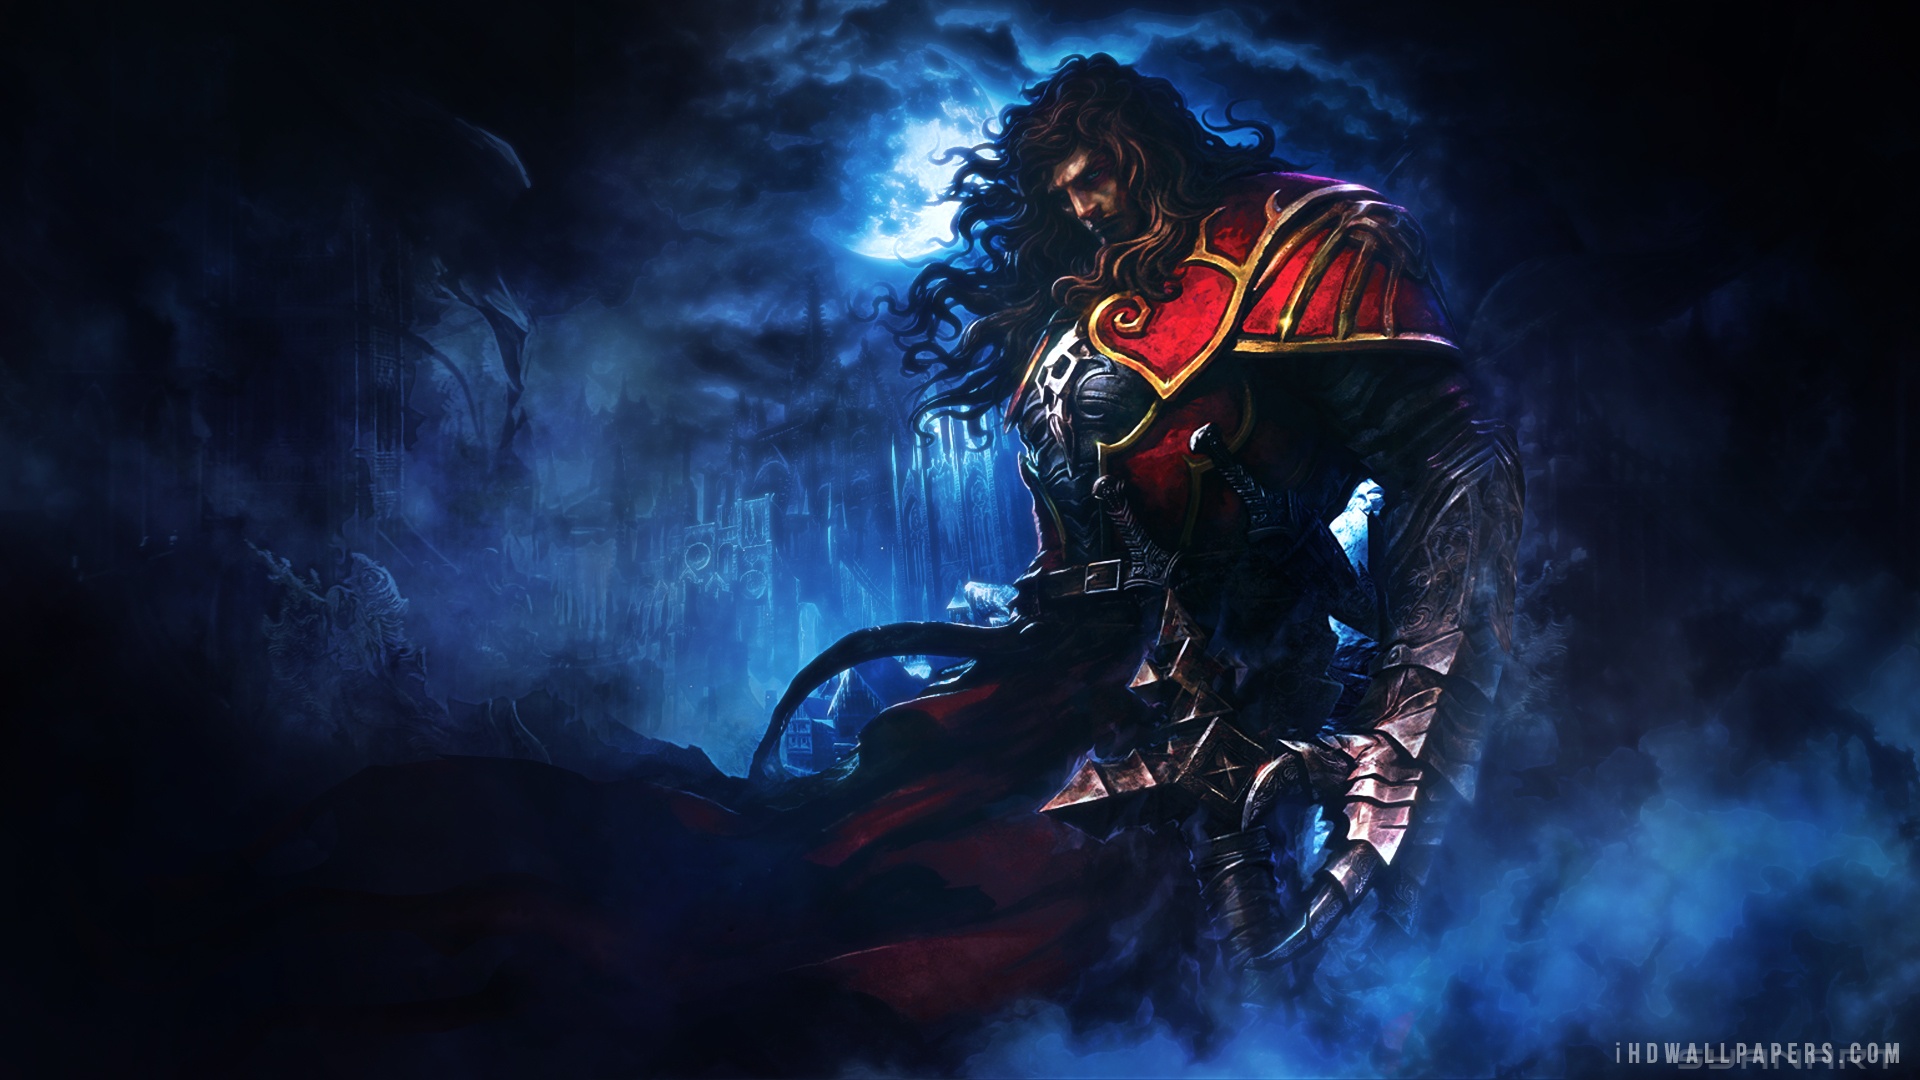 Castlevania Lords of Shadow HD Wallpaper   iHD Wallpapers 1920x1080